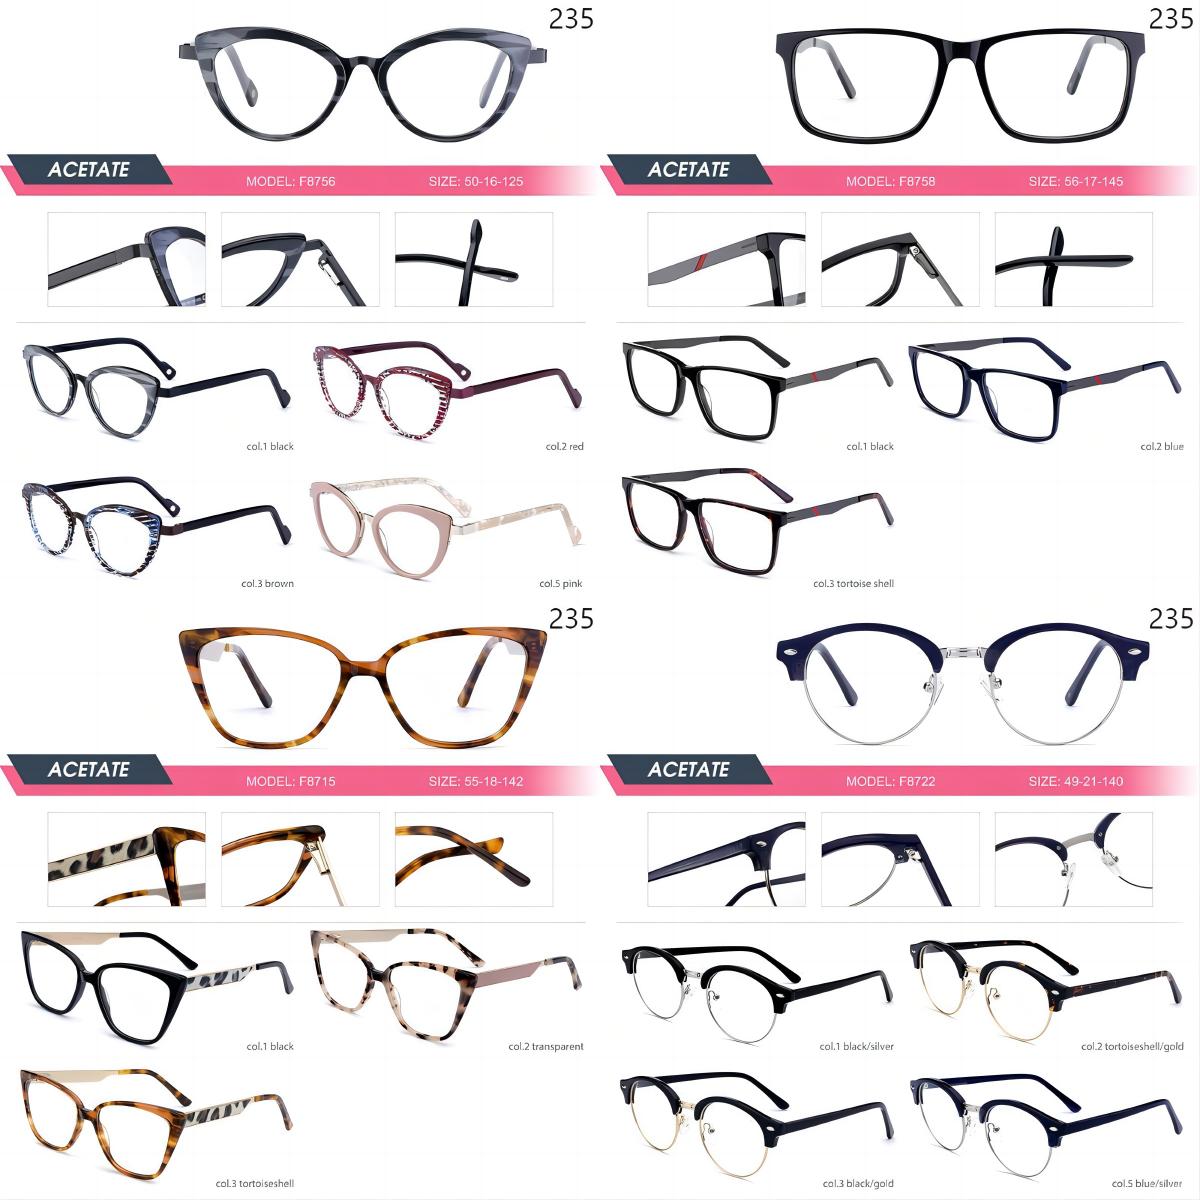 Dachuan Optical China Wholesale Ready Stock Unisex Acetate Optcal Frame with Multiple Styles Catalog (8)